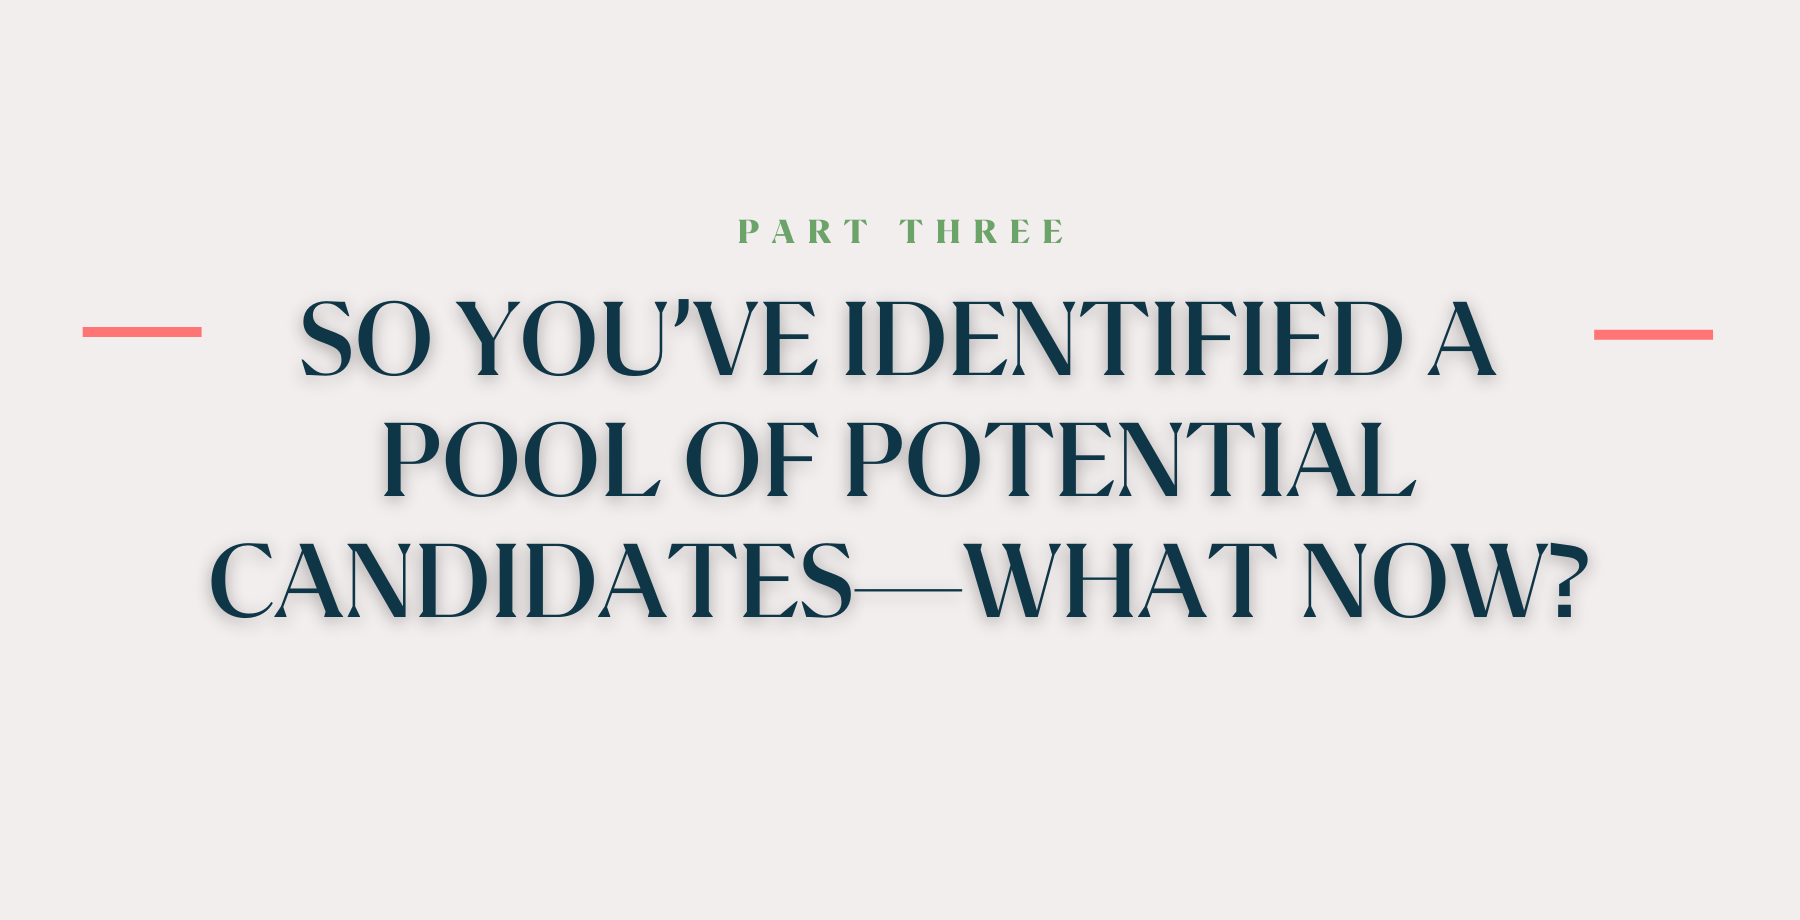 So You’ve Identified a Pool of Potential Candidates—What Now?